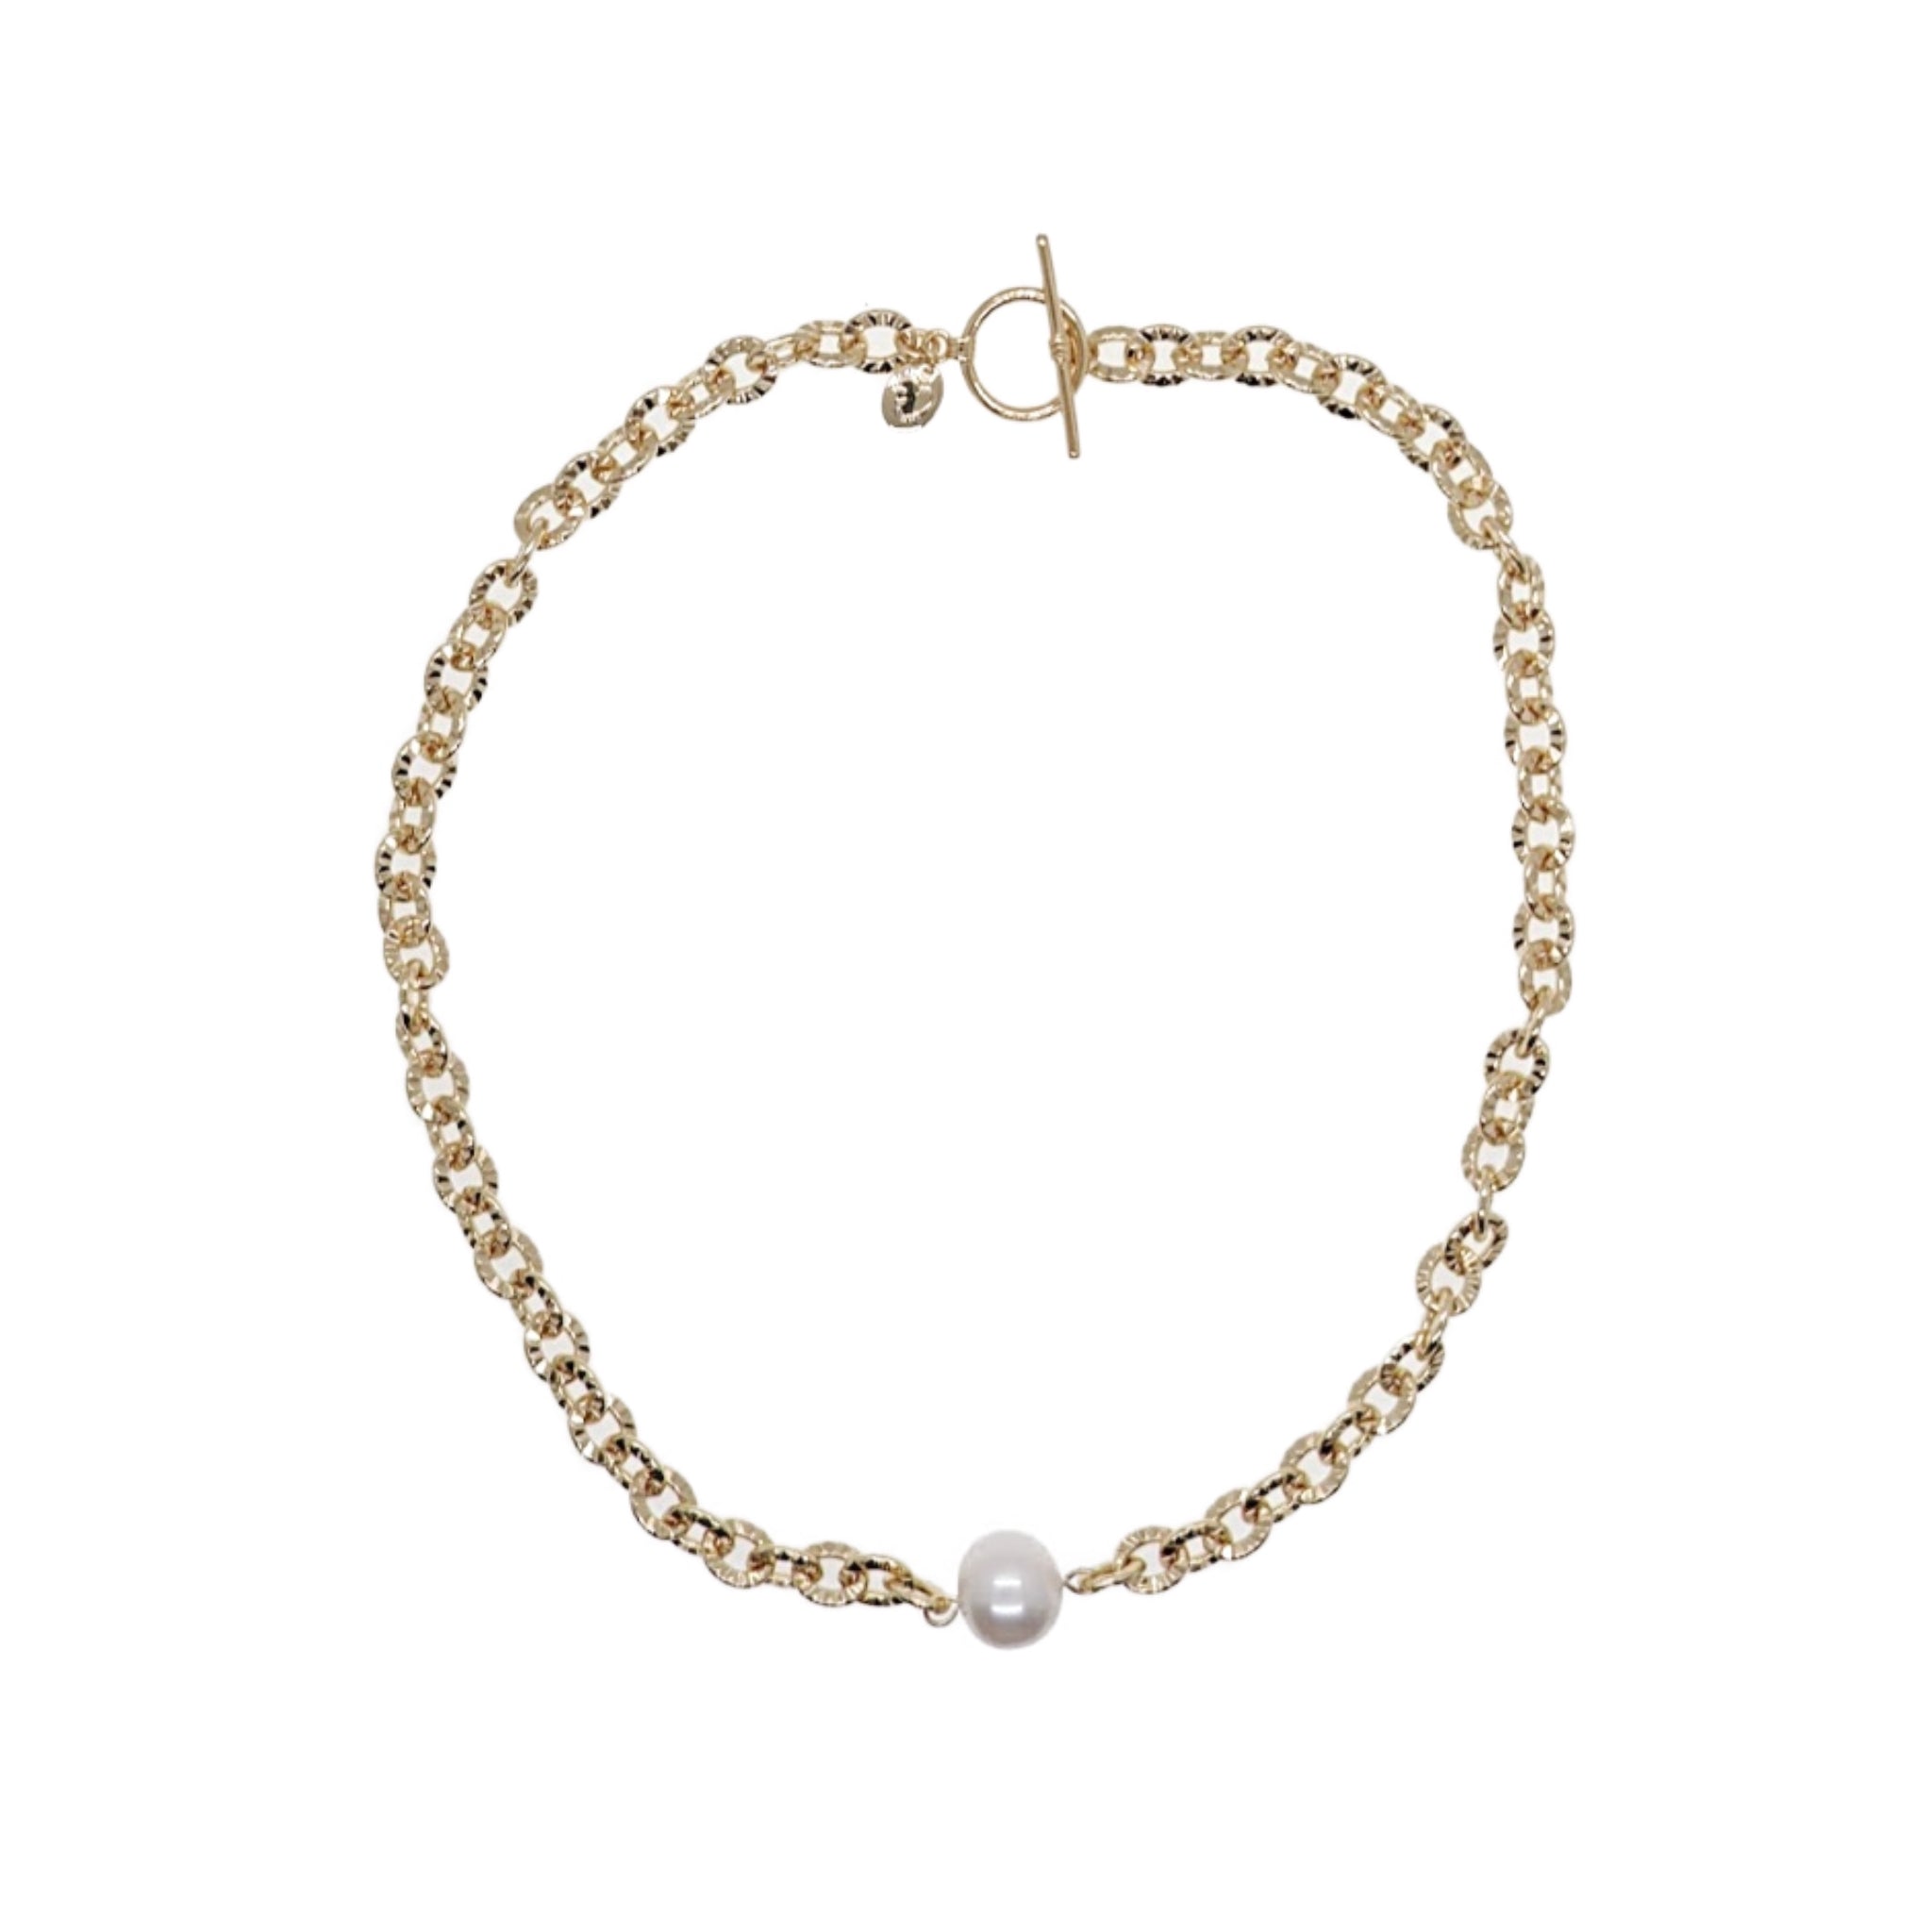 Freshwater Pearl on Chain Necklace - CHOMEL